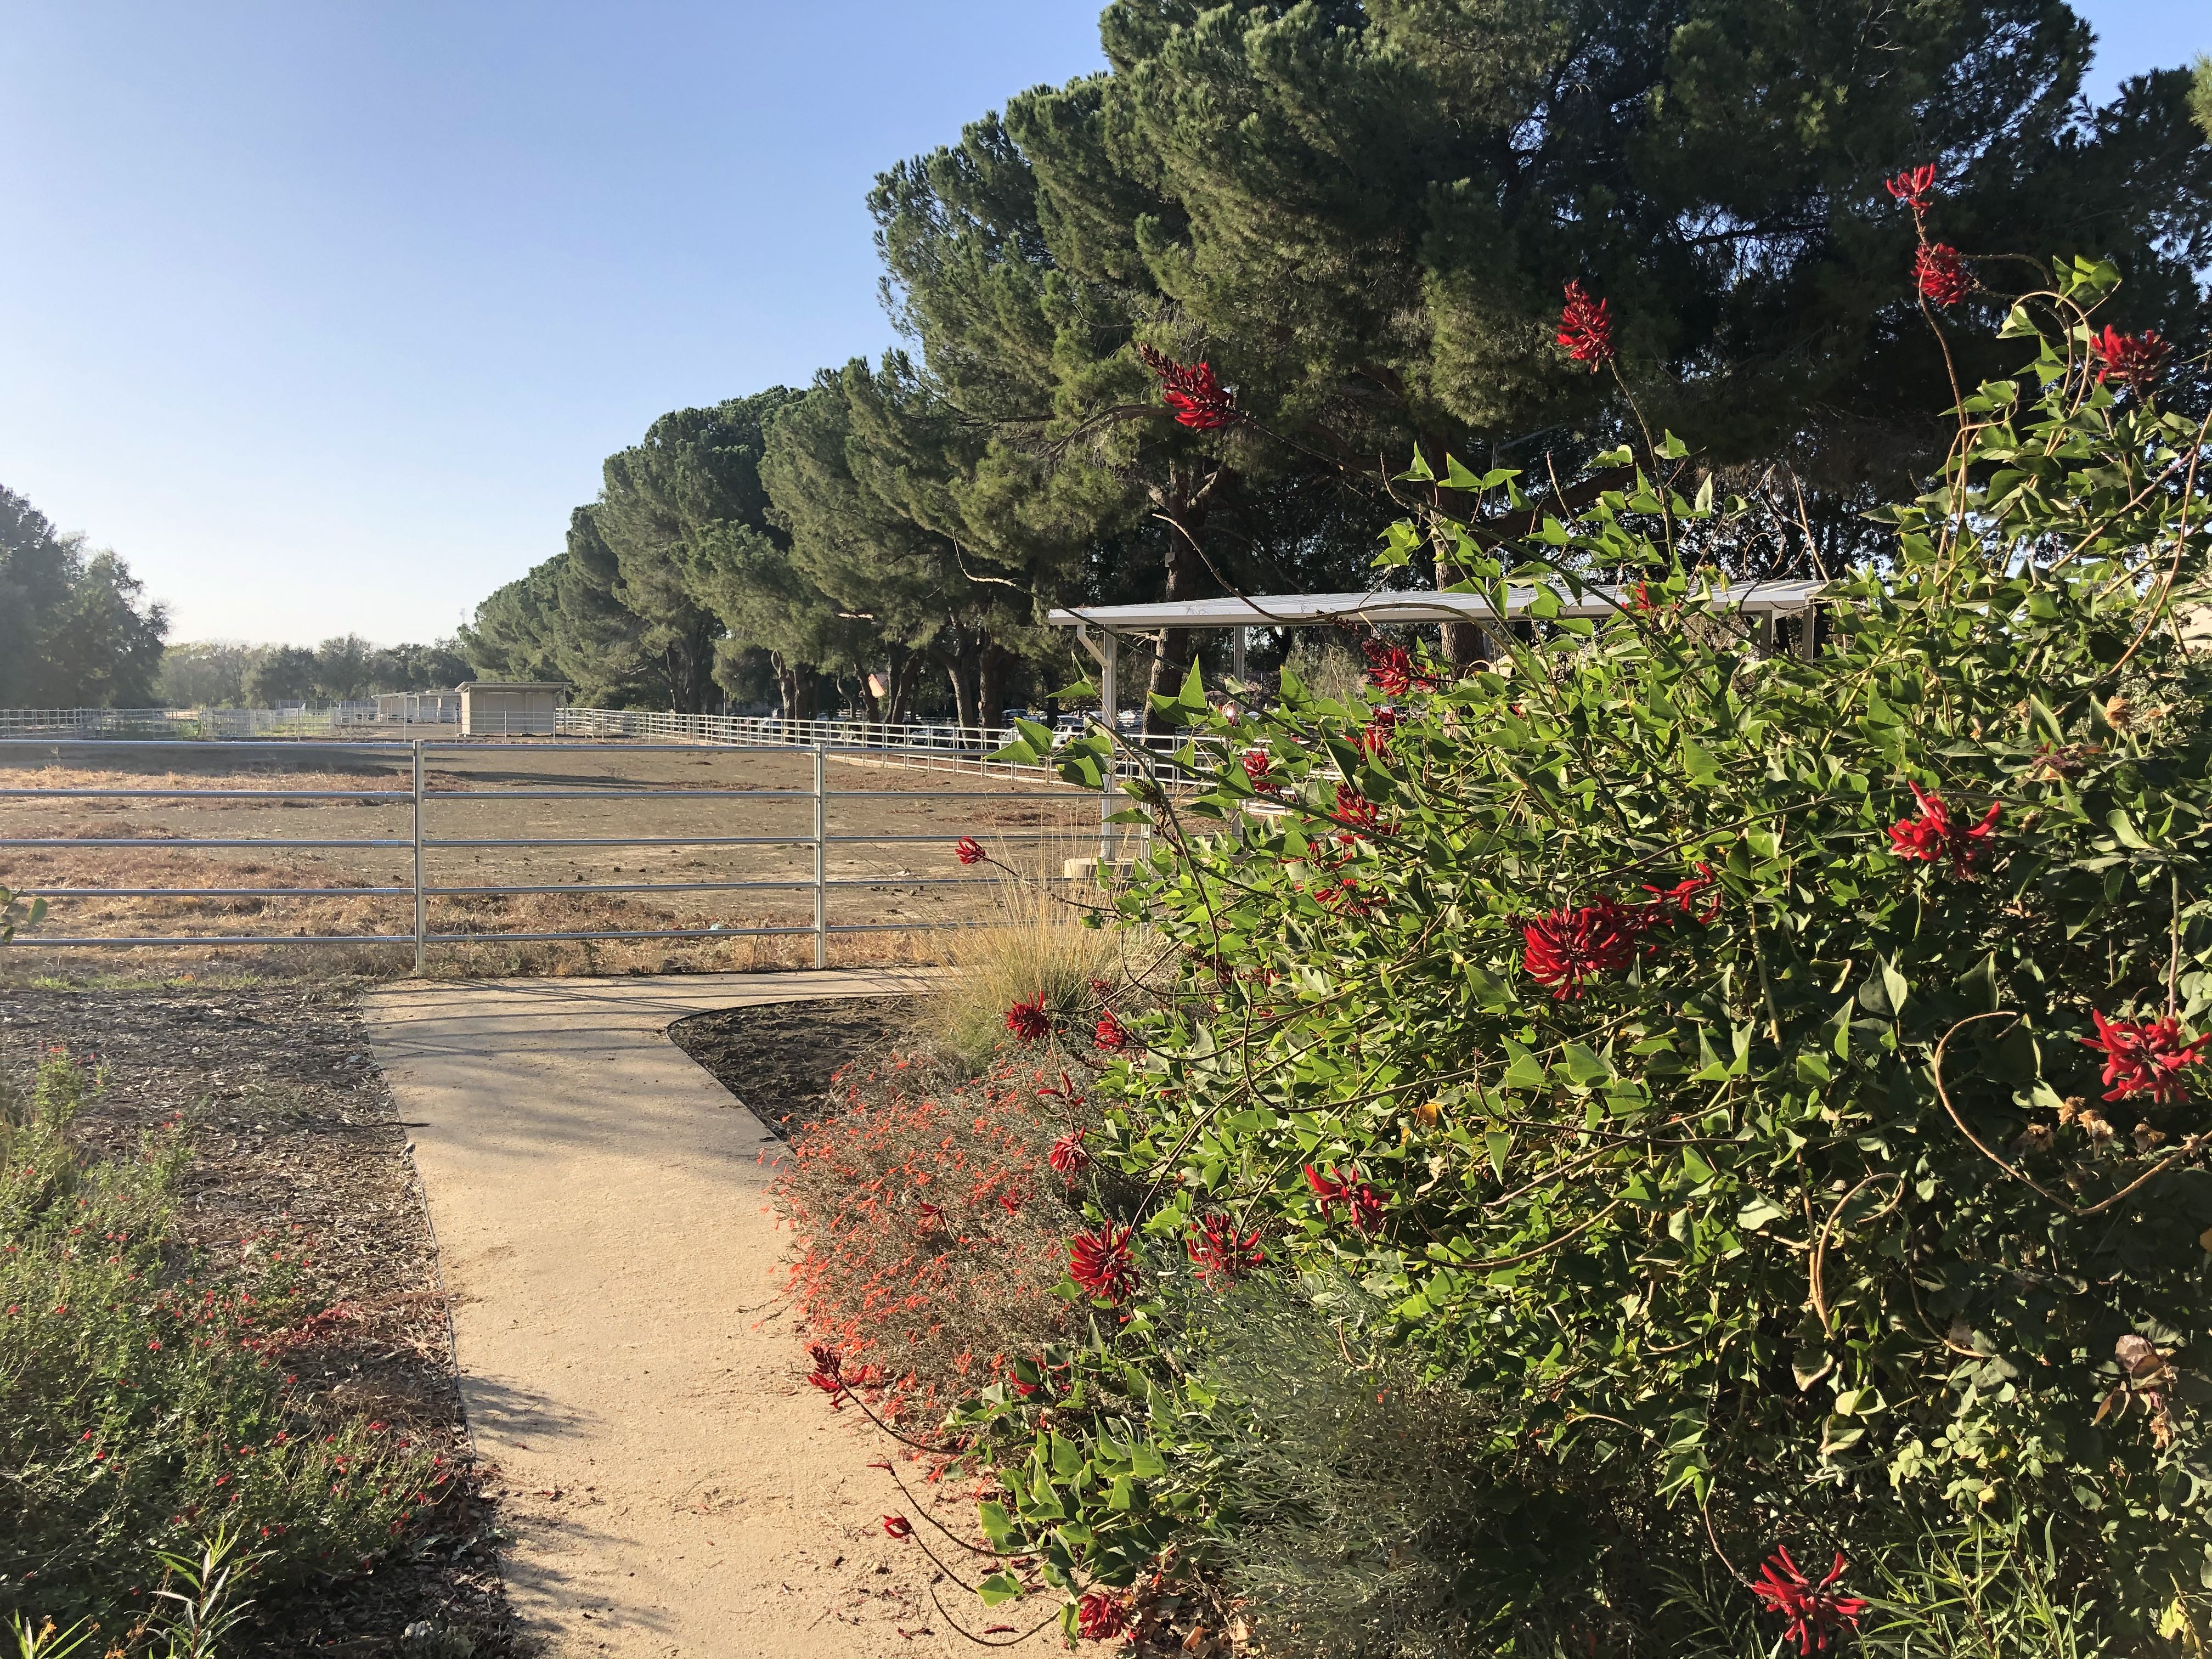 Image of the UC Davis Large Blood Donor Animal Facility as seen from the Ruth Risdon Storer Garden in the UC Davis Arboretum.